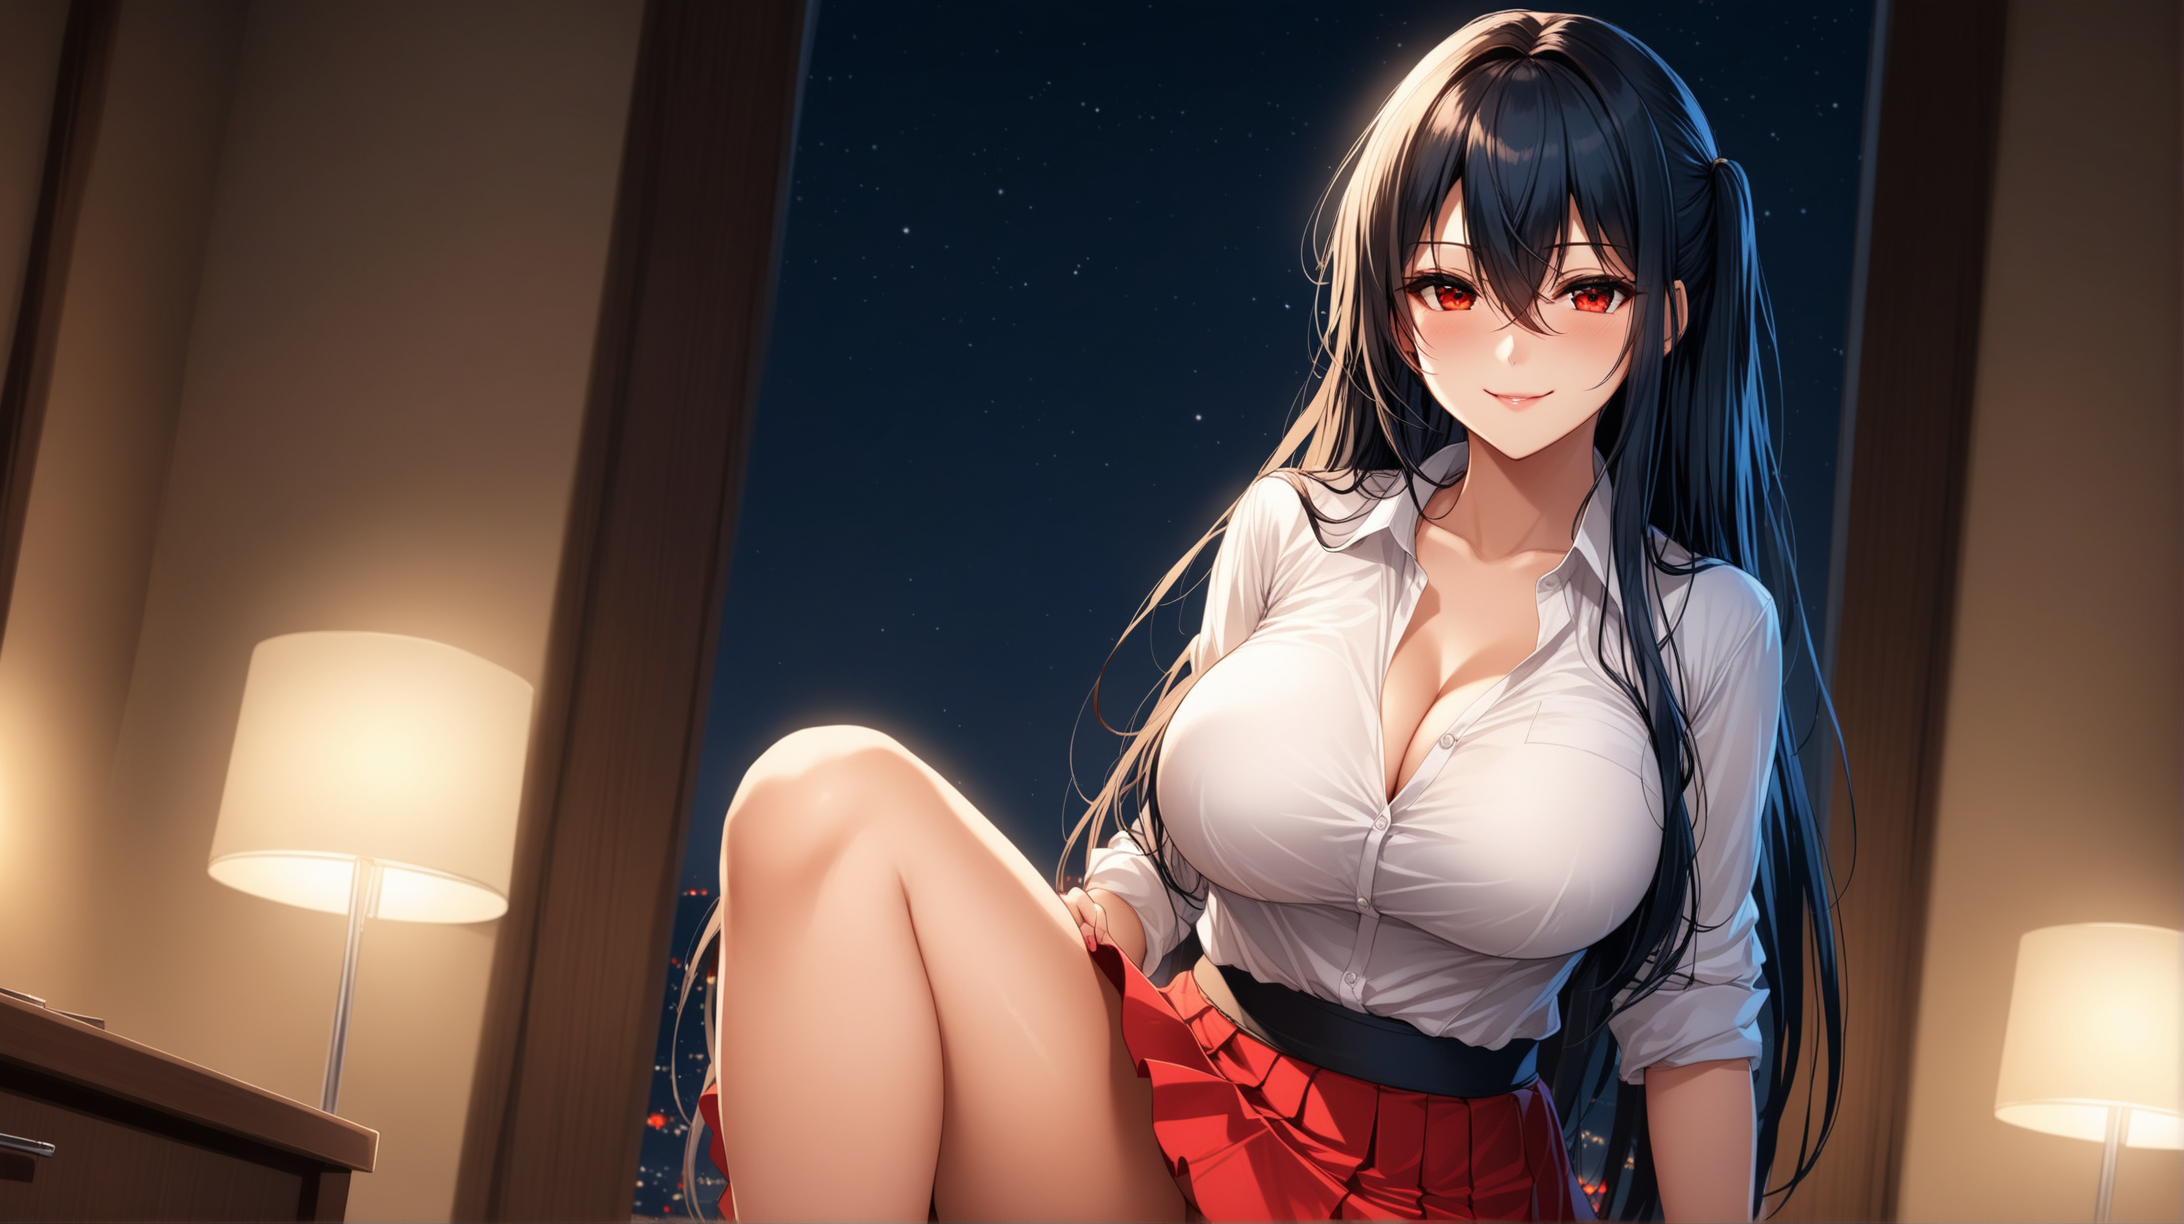 Draw the character Taihou from Azur Lane, long hair, red eyes, high quality, indoors, at night, dim lighting, seductive, low angle, wearing a skirt and shirt, smiling at the viewer